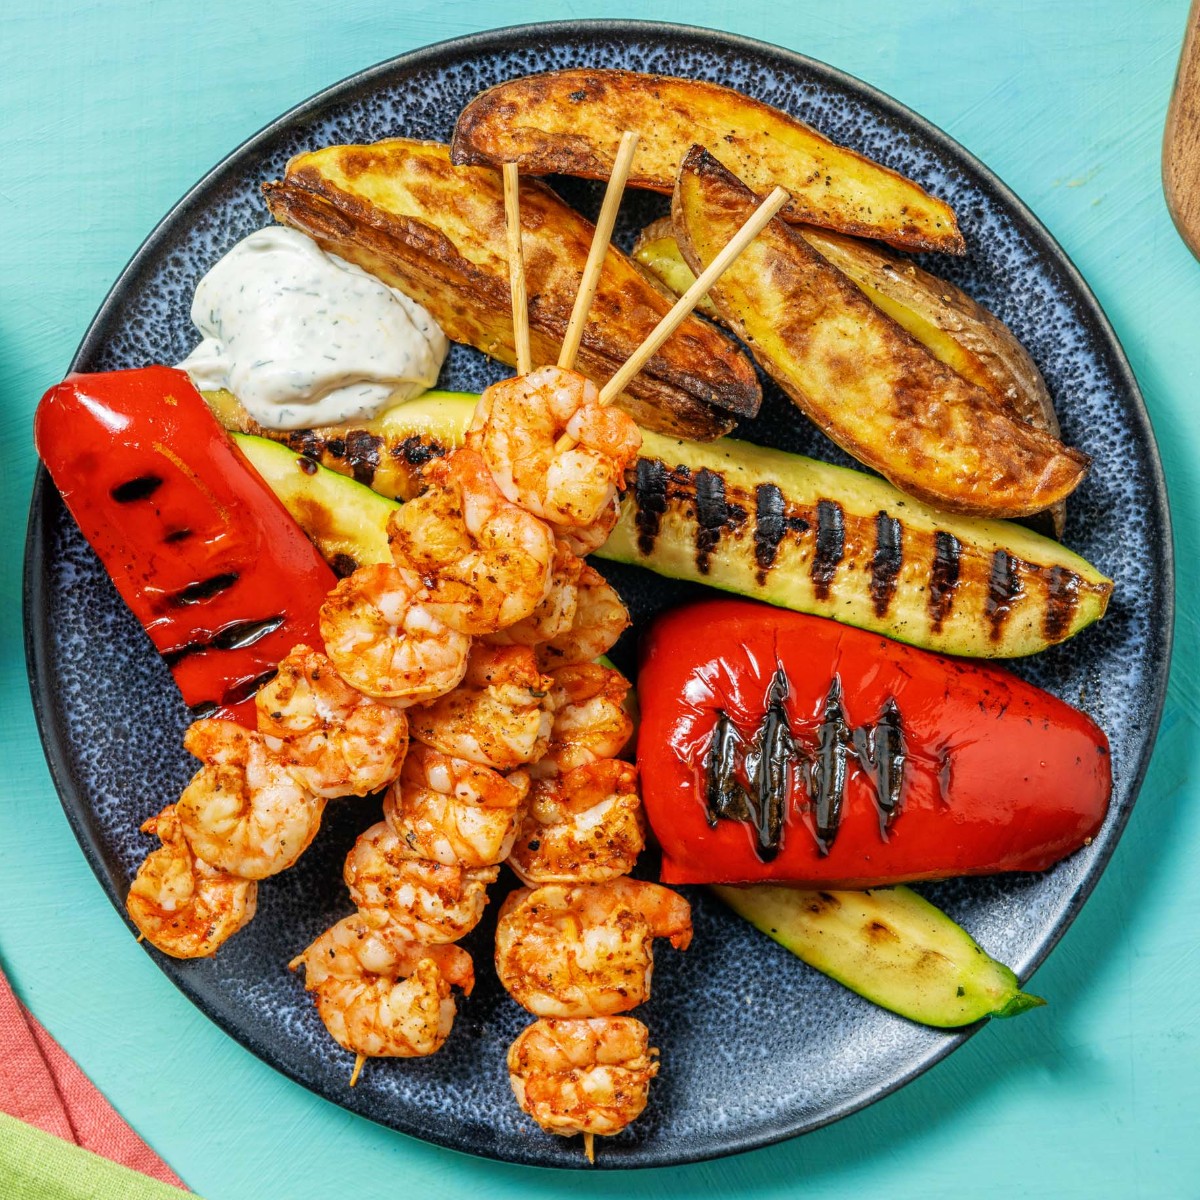 This meal is shrimply amazing 🦐 Get the recipe for our Grilled Old Bay Shrimp Skewers here 👉 hfrsh.me/4a #Hellofresh #foodpun #grillrecipe #grill #shrimprecipe